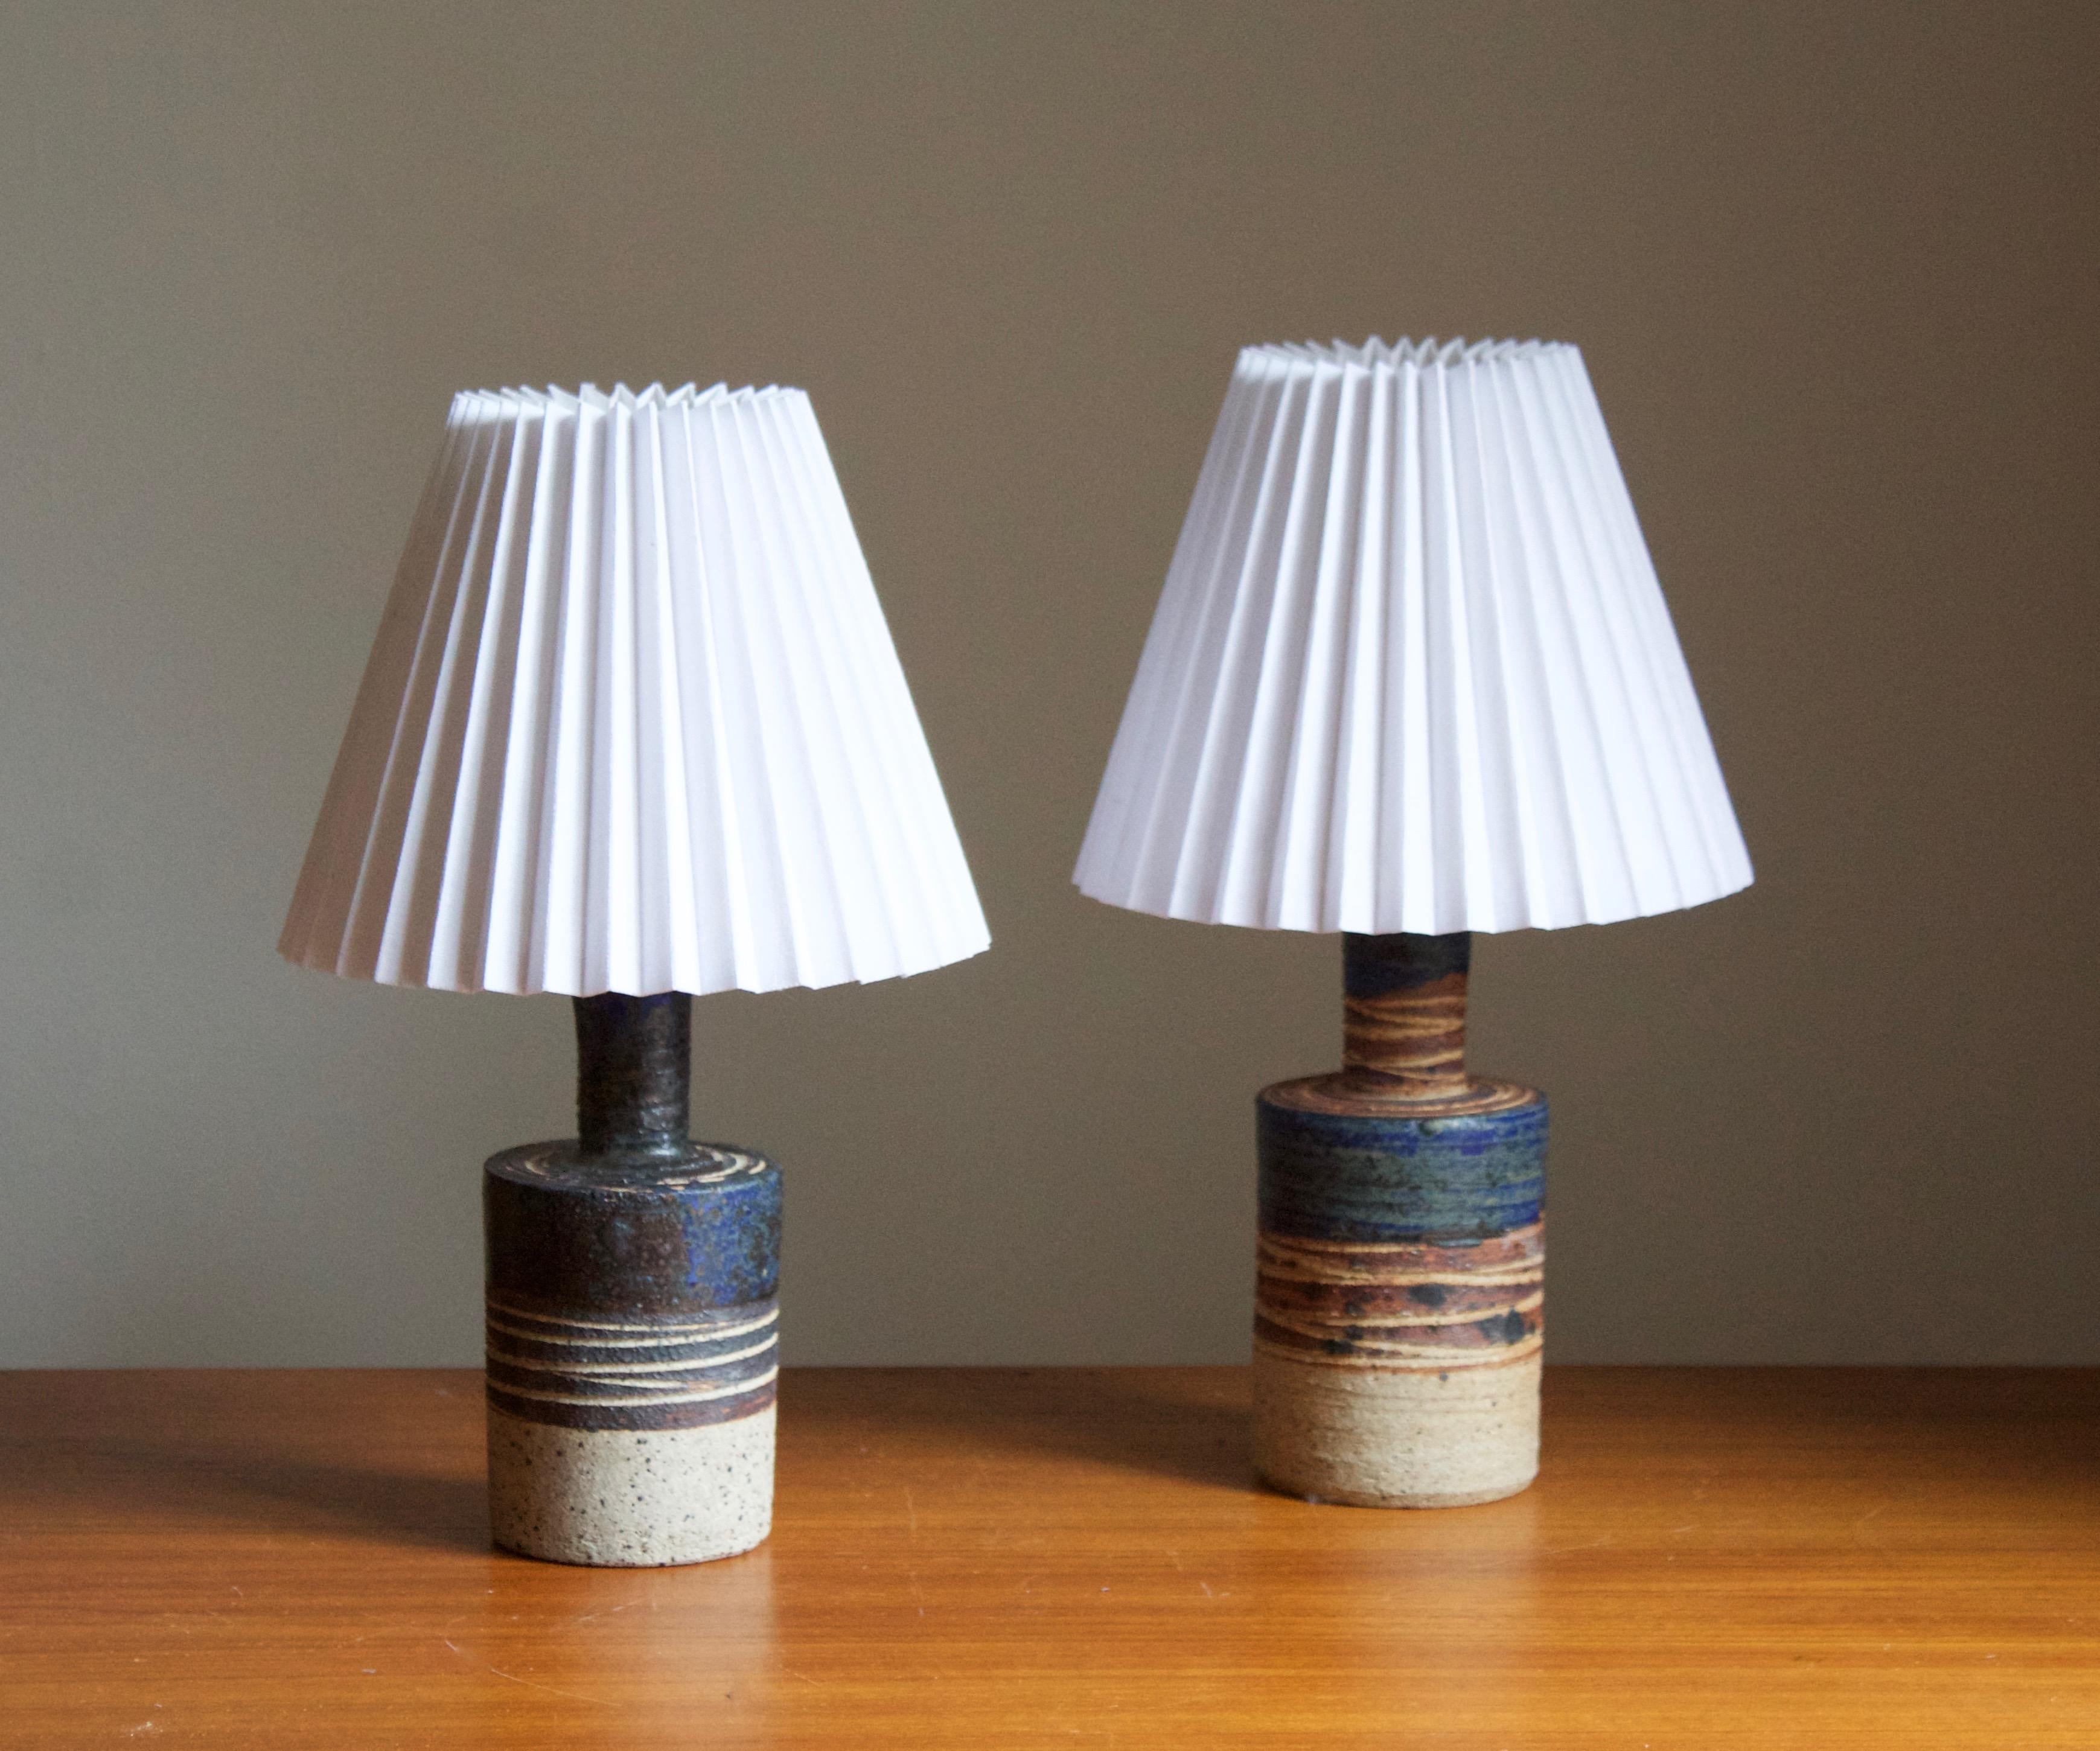 A pair of table lamps. Produced and designed by Tue Poulsen, Denmark, 1960s. Underside of base signed.

Sold without lampshade. Stated dimensions exclude lampshade. Height includes socket. One lamp is slightly less tell, stated dimensions are of the